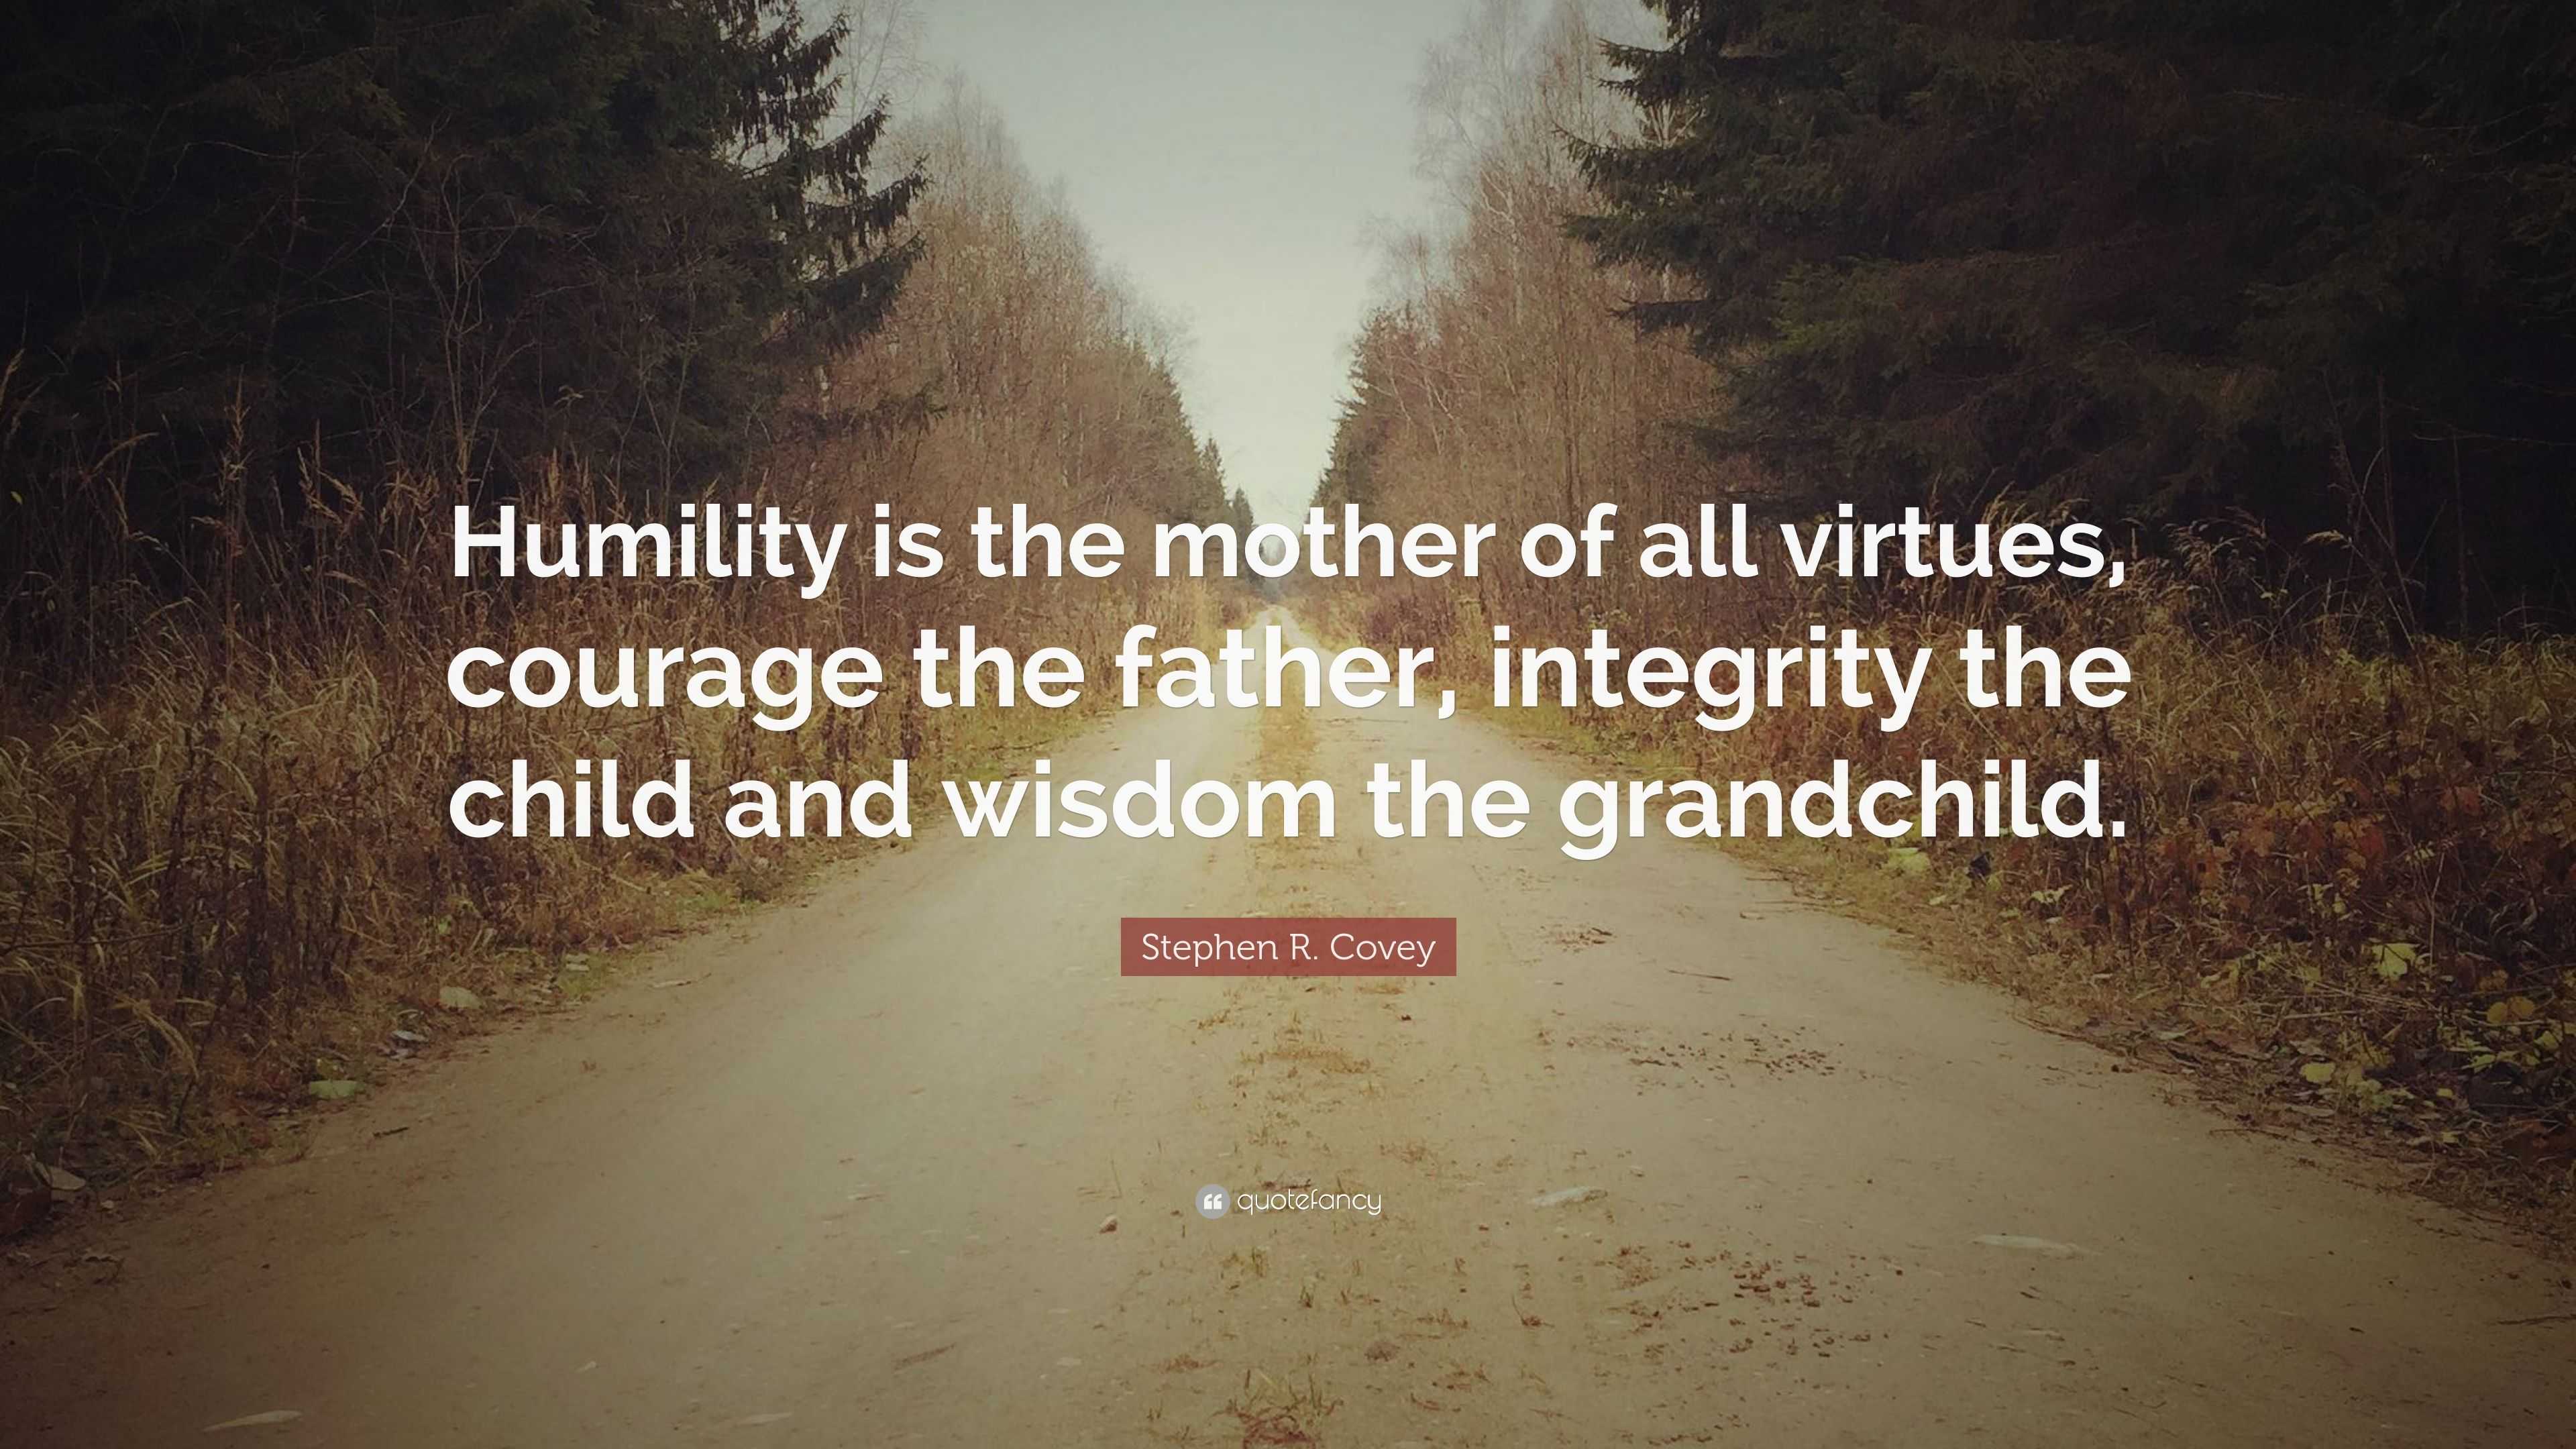 essay on humility is the mother of all virtues